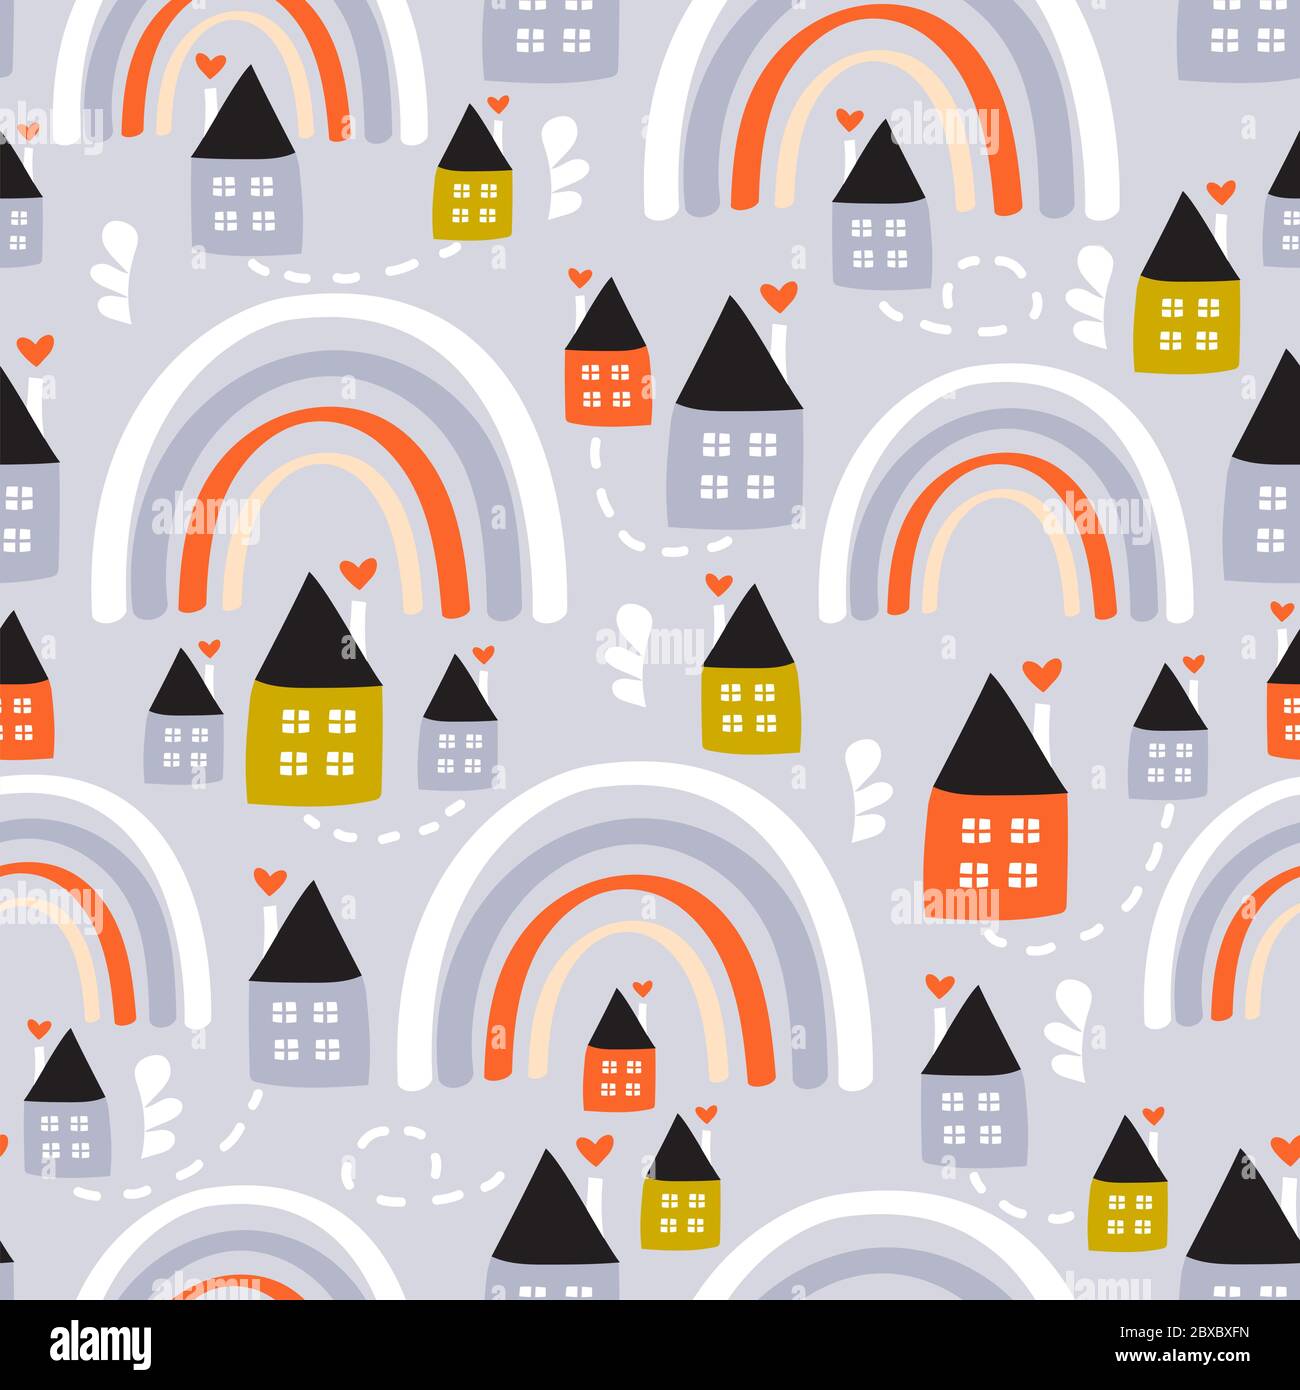 Seamless pattern with hand drawn rainbows and houses. Creative texture for fabric, wrapping, textile, wallpaper, apparel. Vector illustration Stock Vector